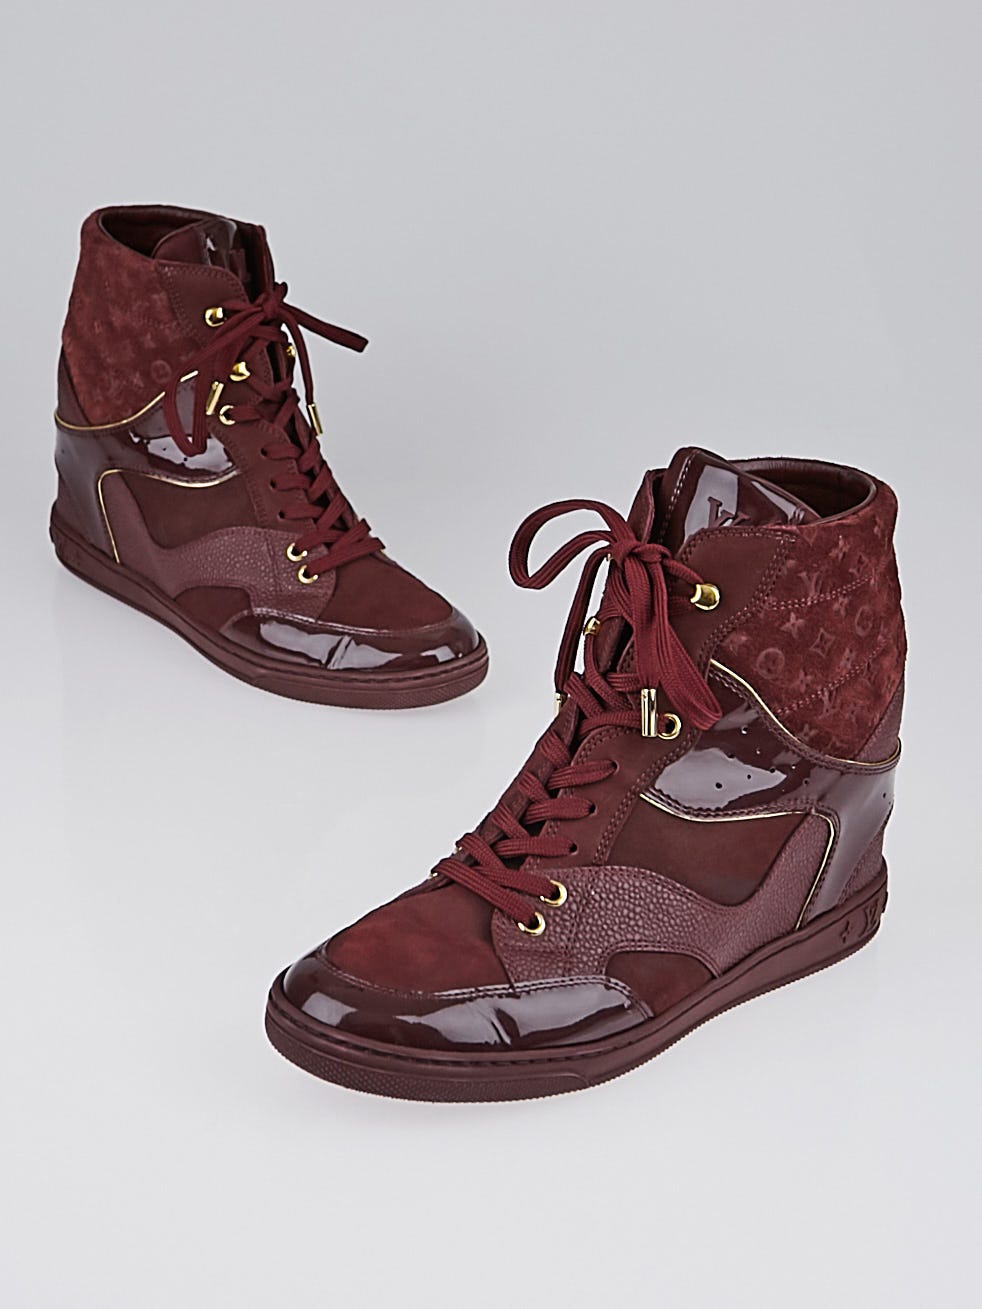 Louis Vuitton Leather Fashion Sneakers for Women